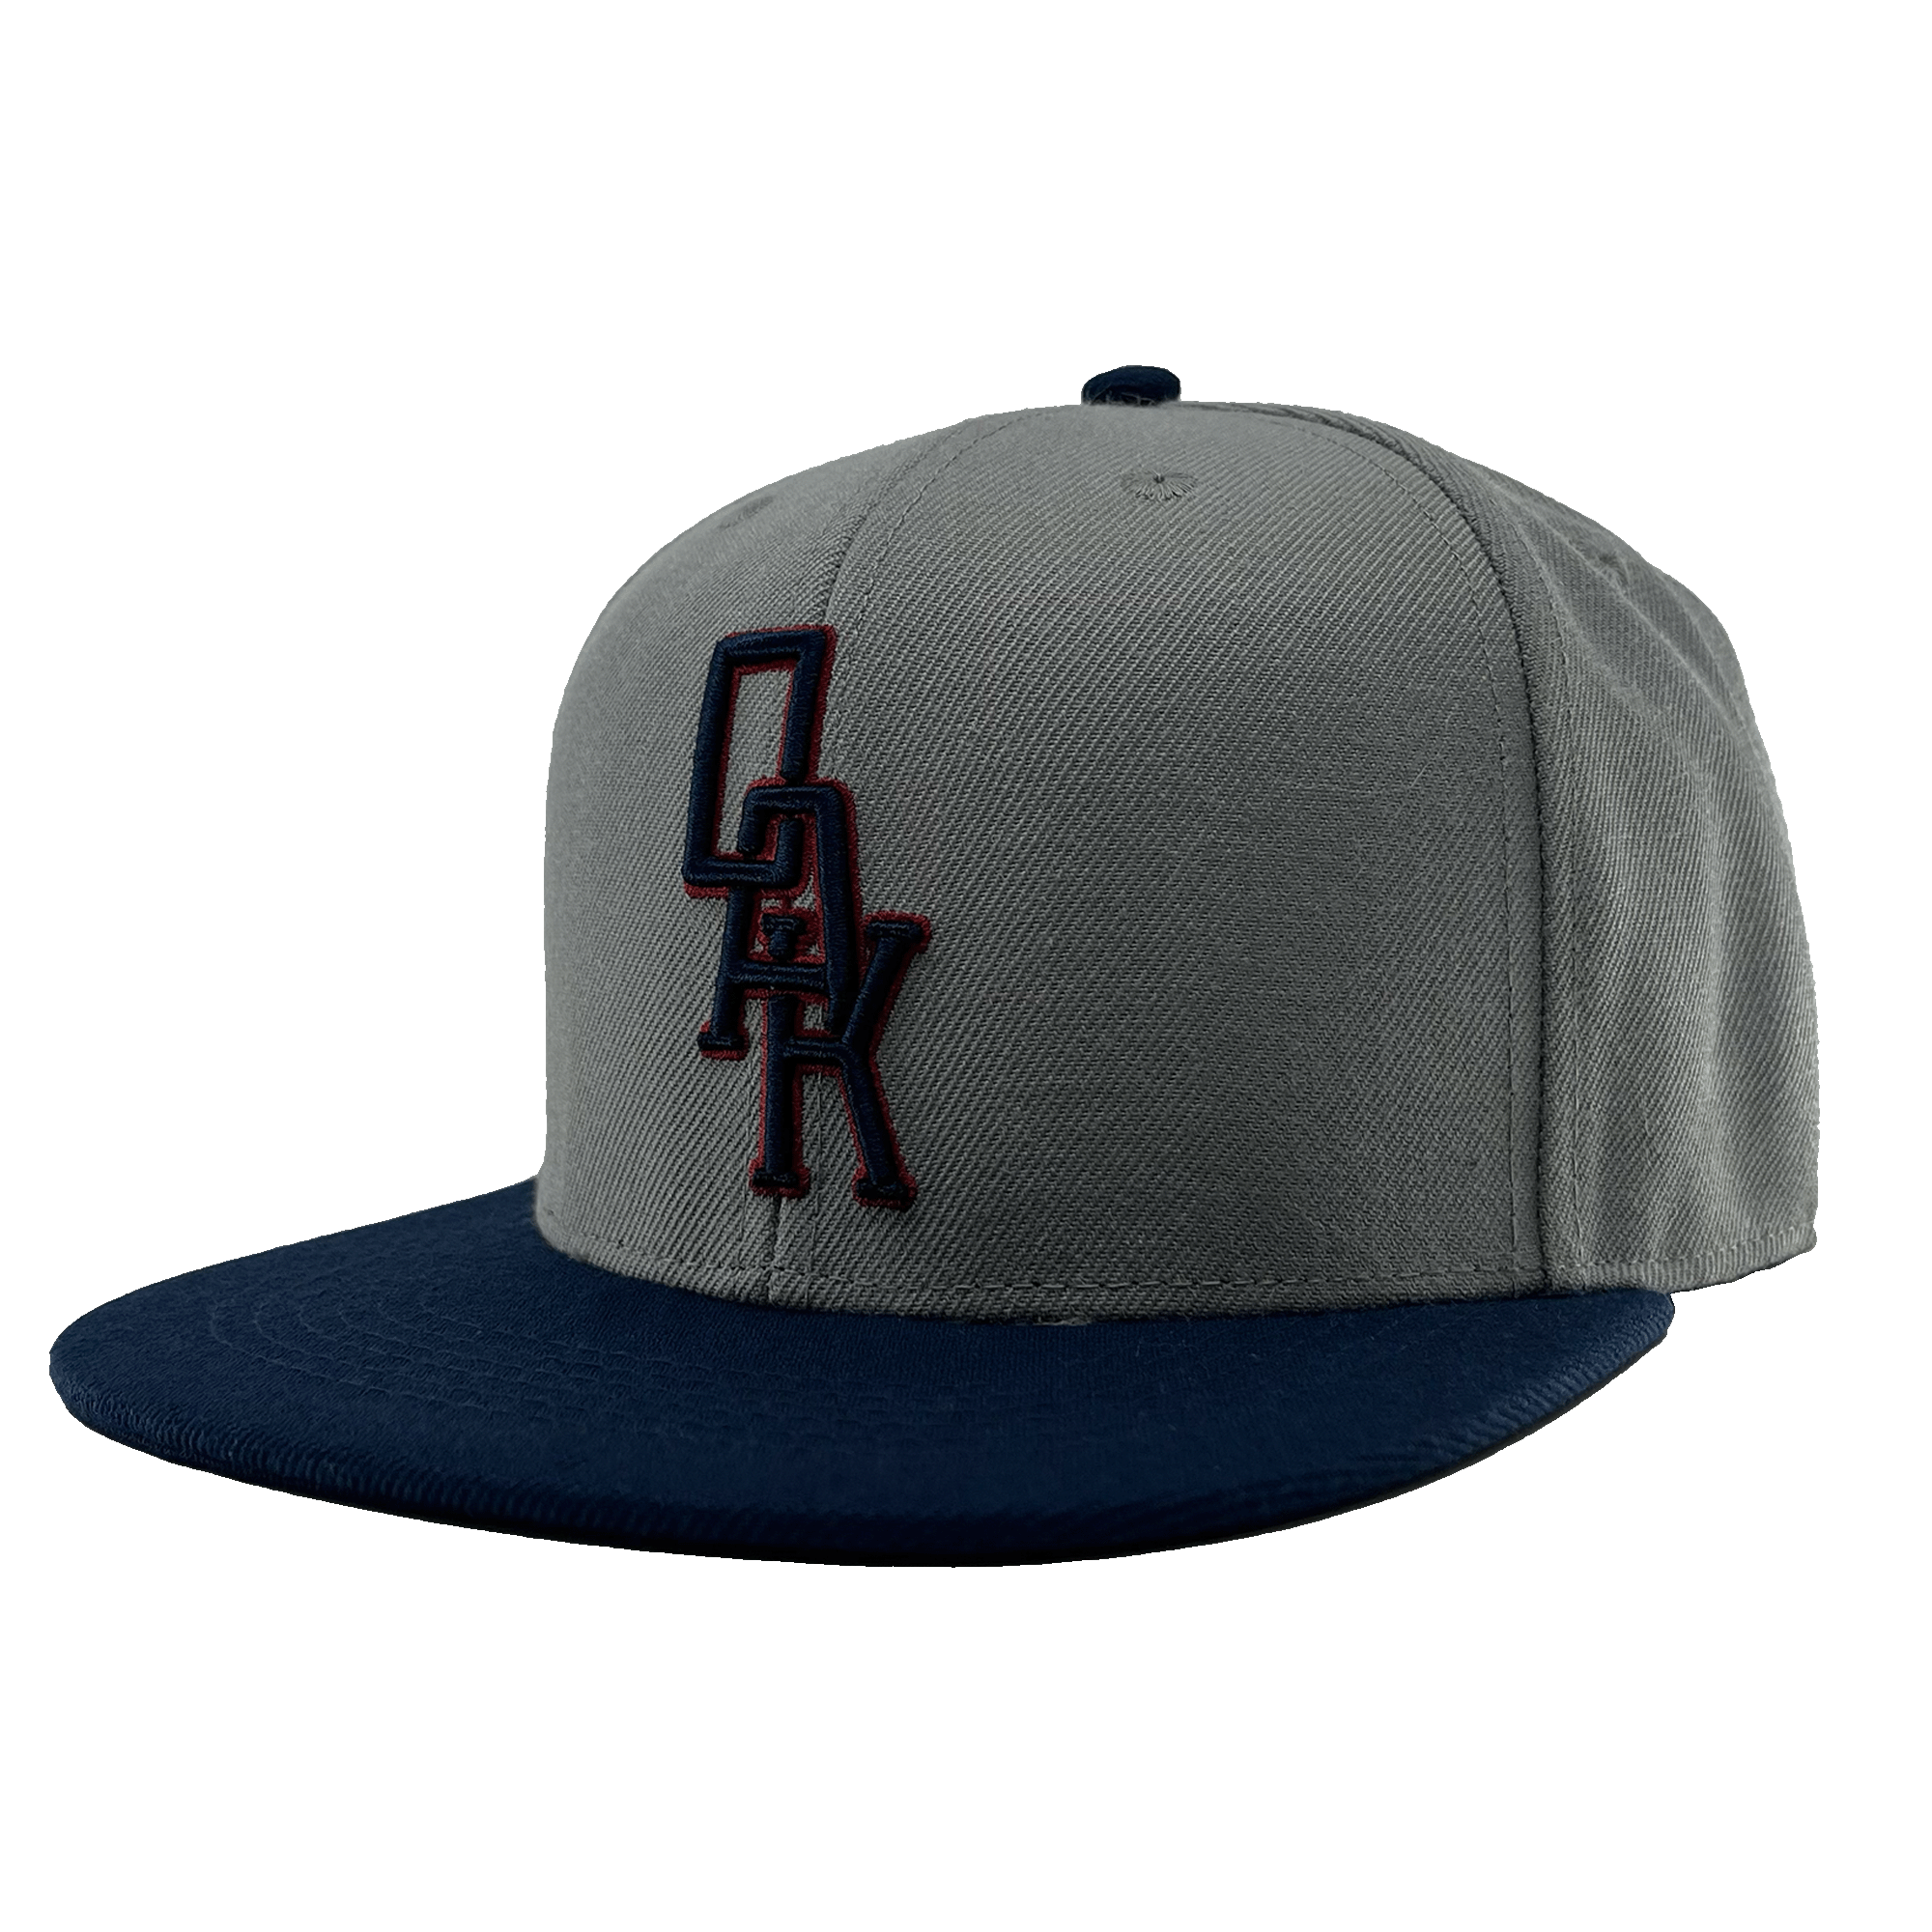 Angled side view of a grey hat with navy bill and navy and red embroidered OAK logo on the front crown.